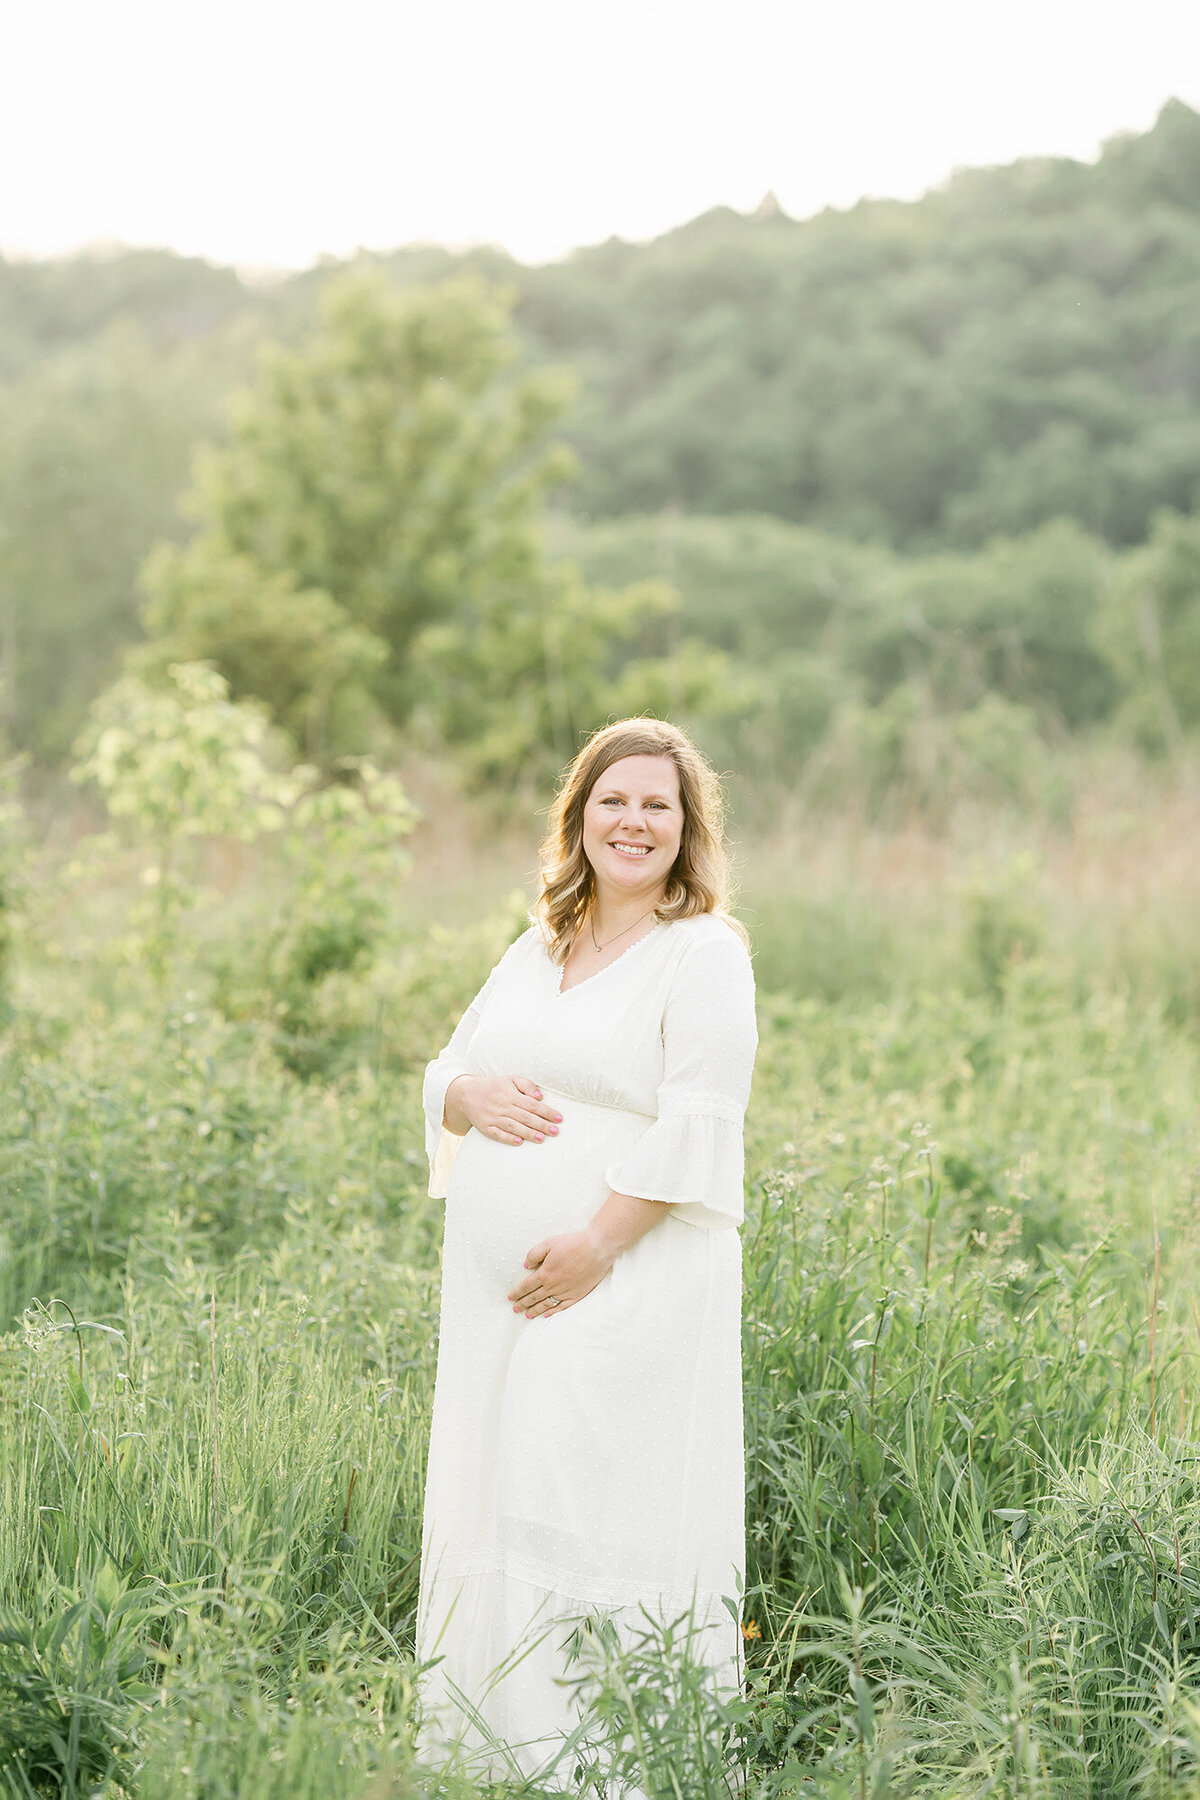 Beautiful outdoor location for photos in Louisville Kentucky with Julie Brock photographing a maternity photo session